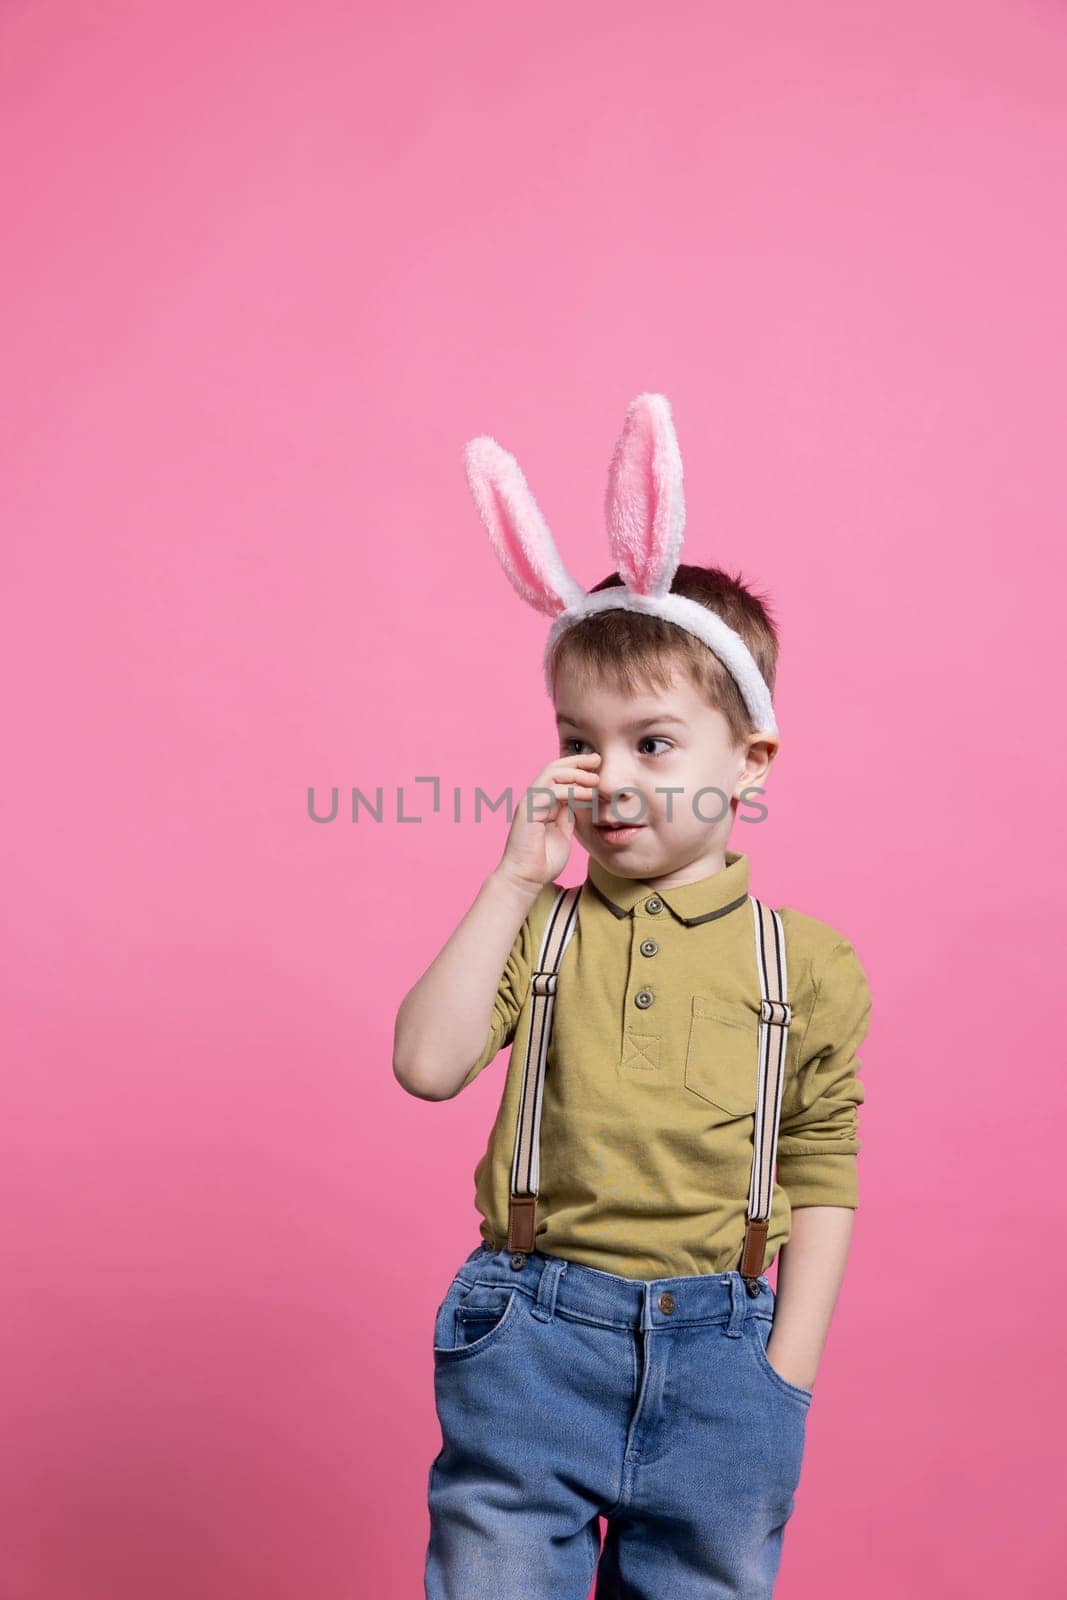 Joyful young kid feeling confident posing against pink background, wearing bunny ears to celebrate easter holiday event. Small little child smiling in front of camera, waiting to receive presents.